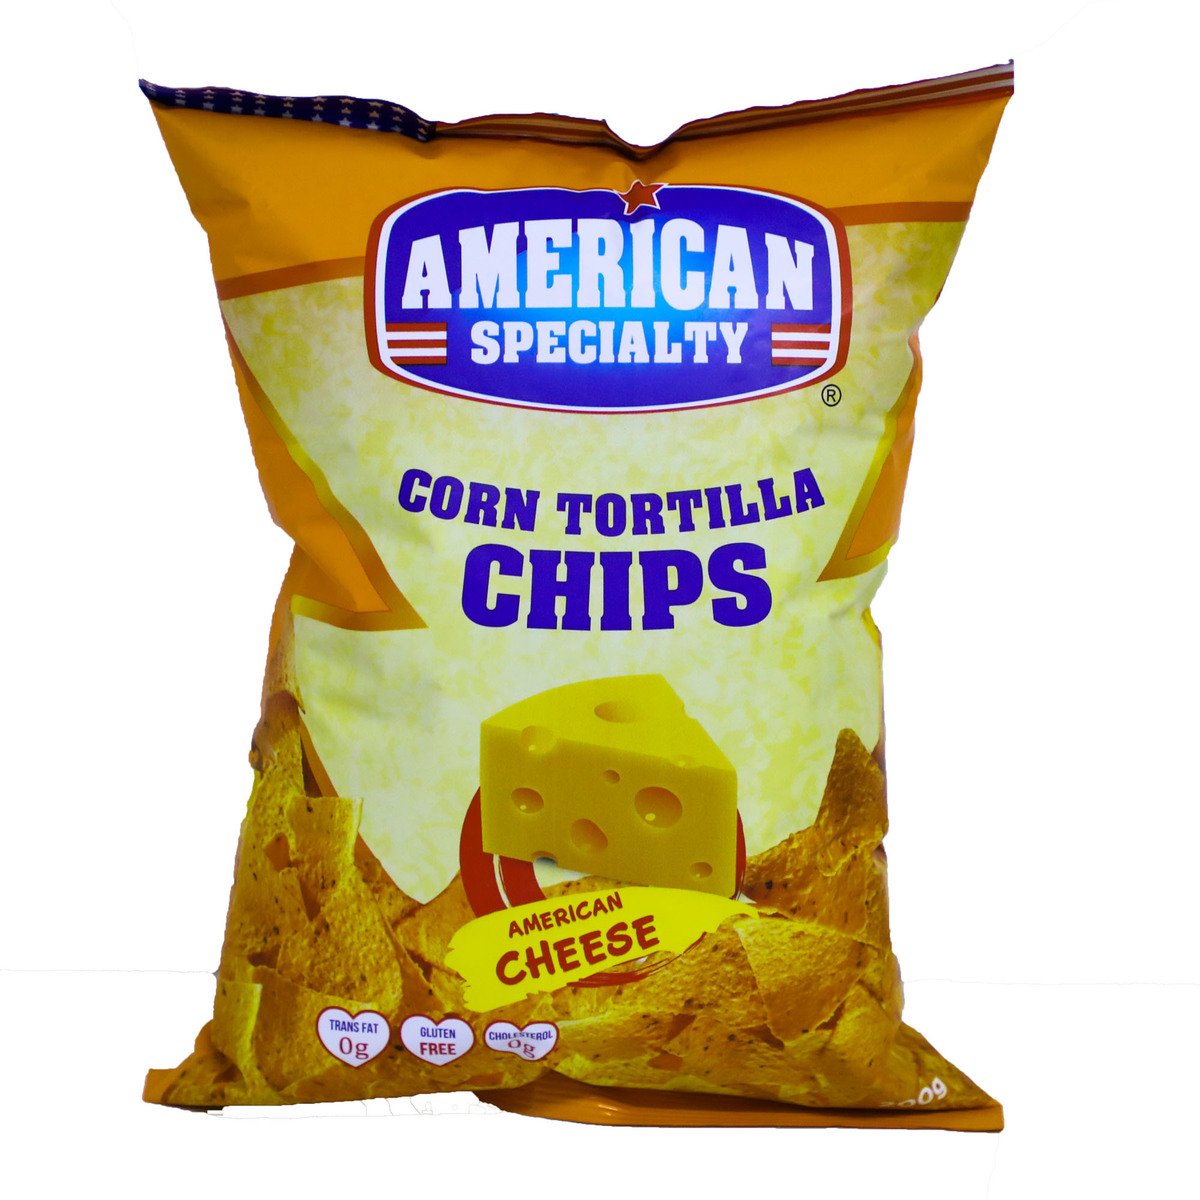 American Specialty American Cheese Corn Tortilla Chips 200 g